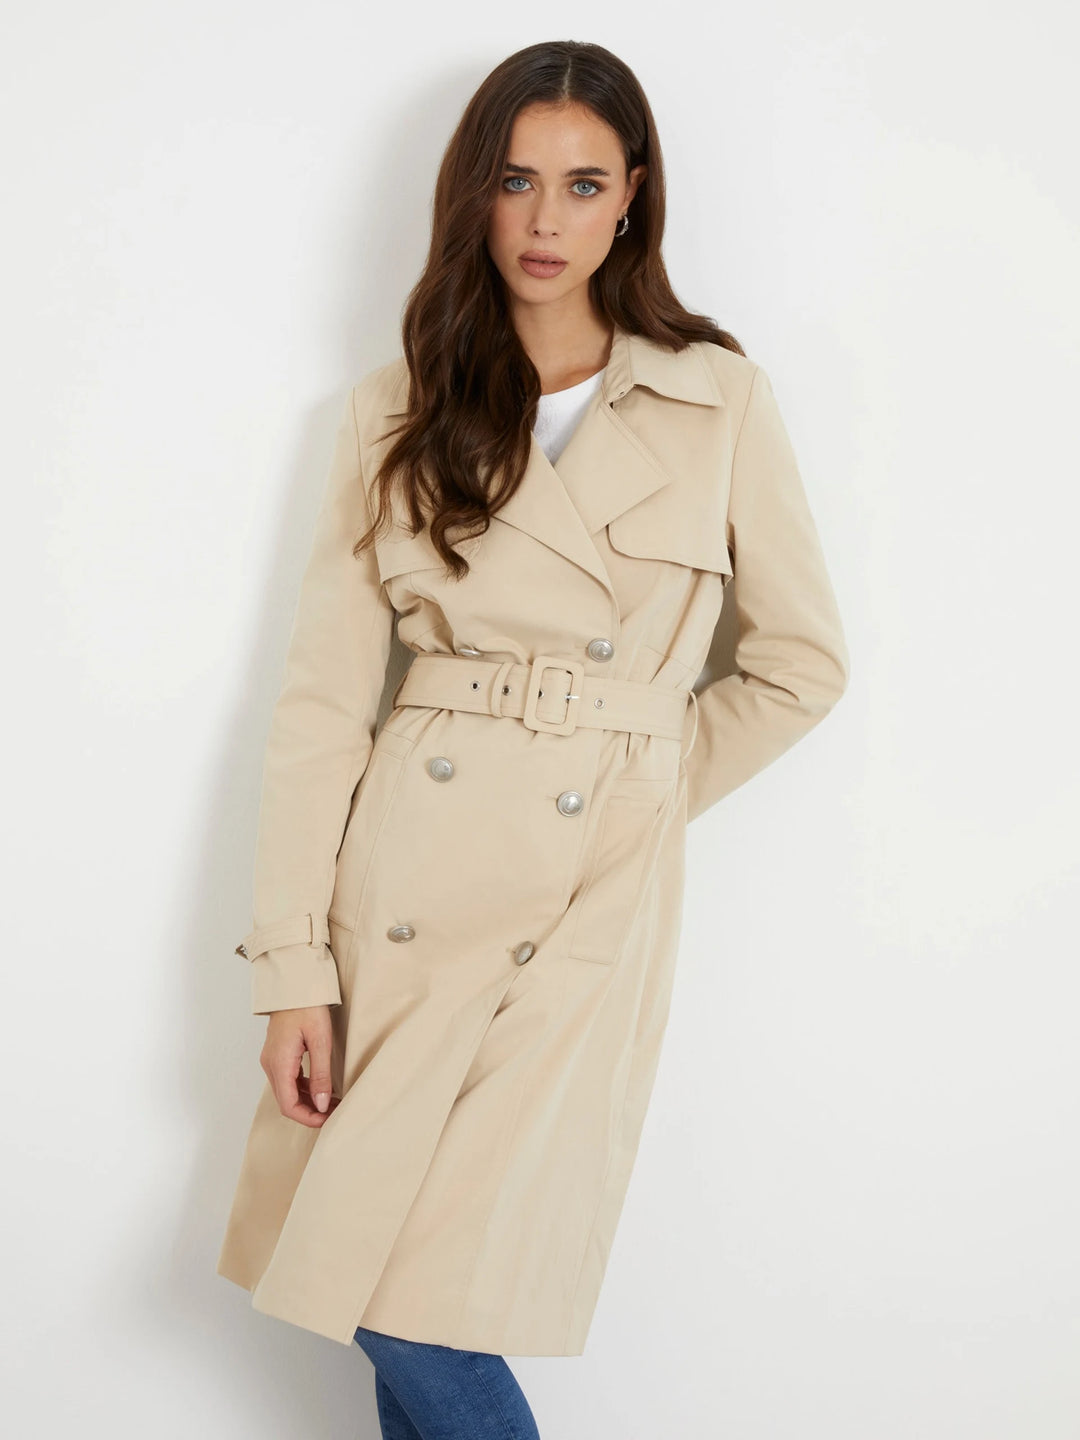 Guess Asia Honey Trench Coat